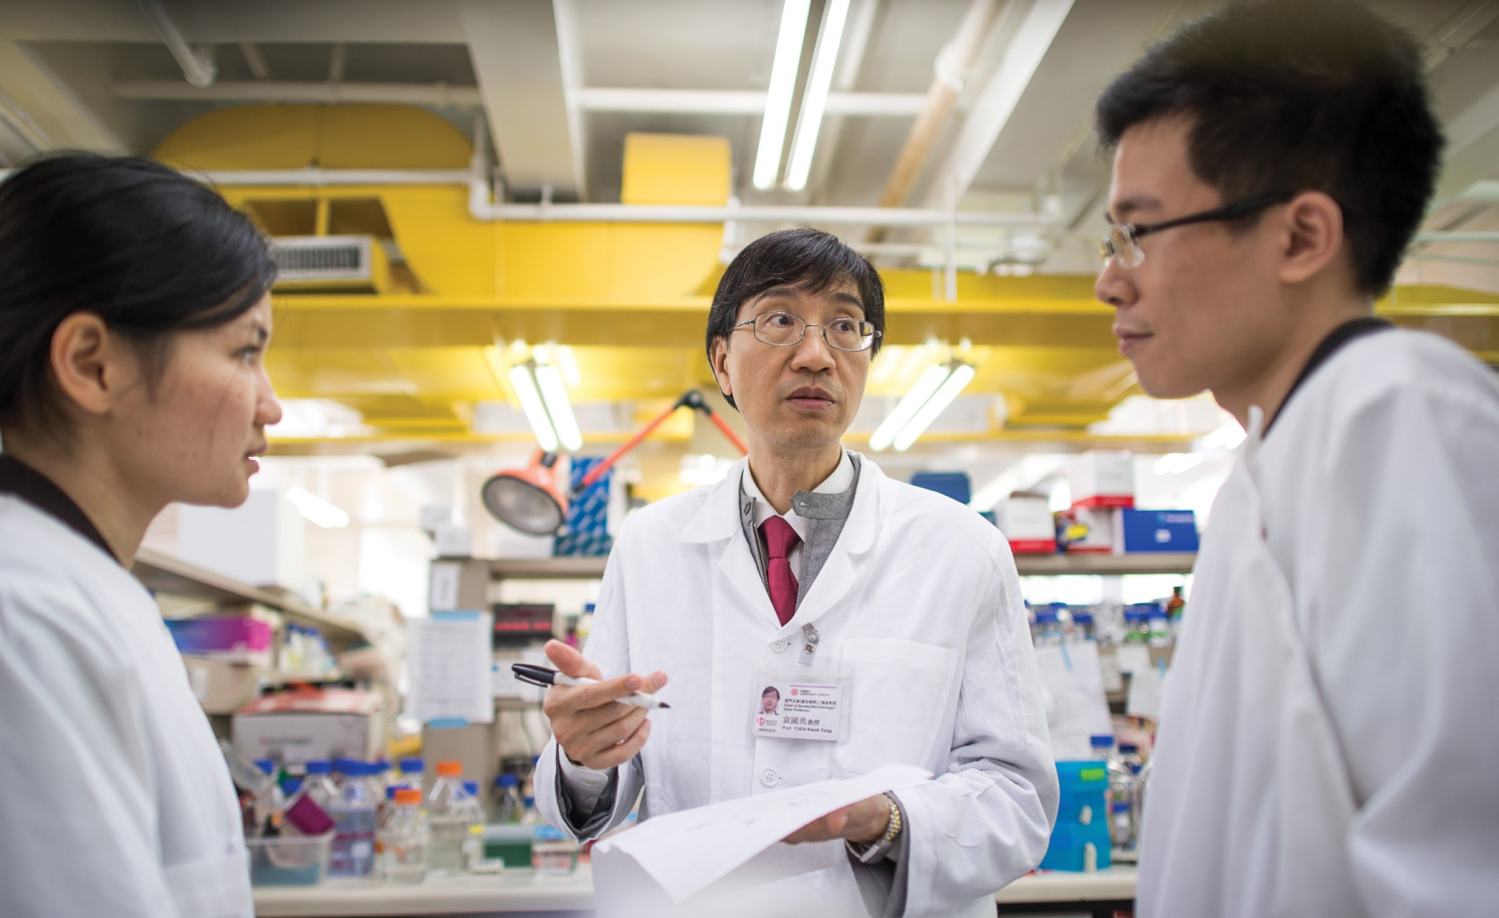 Professor YUEN Kwok-yung discusses with students in a laboratory.
